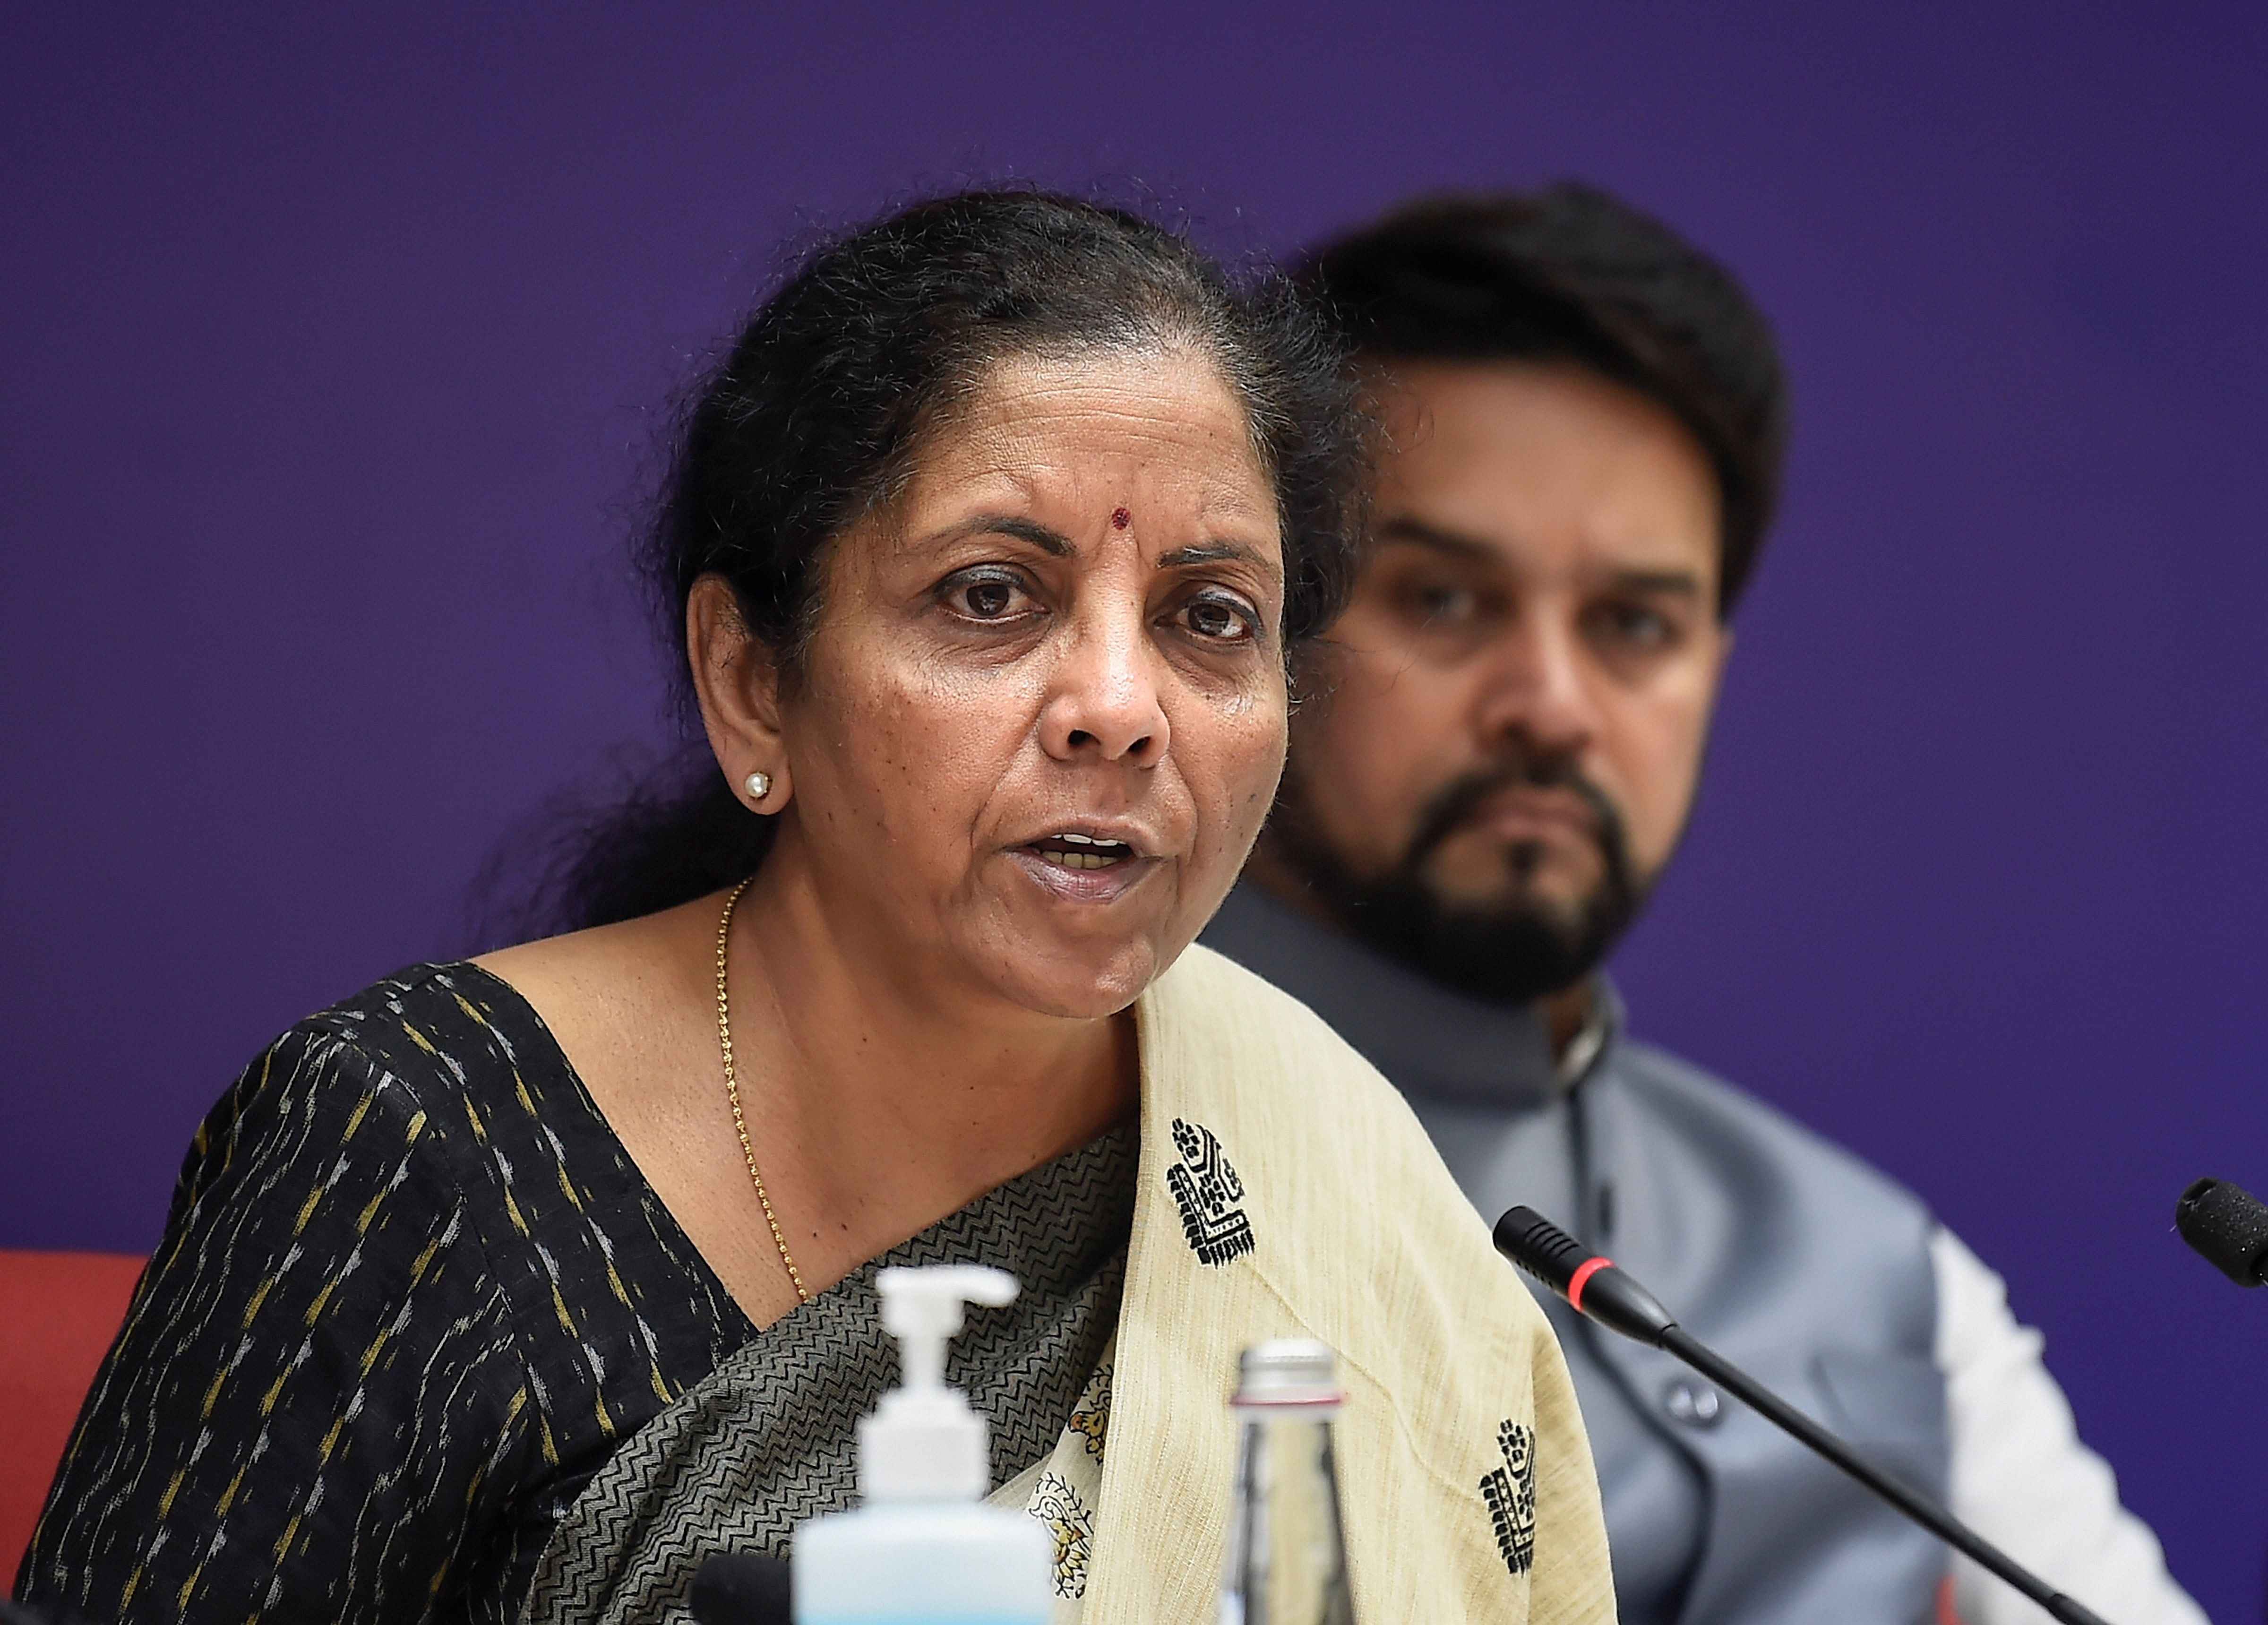 Union Finance Minister Nirmala Sitharaman during a media briefing after 39th GST Council meeting, in New Delhi. (Credit: PTI)